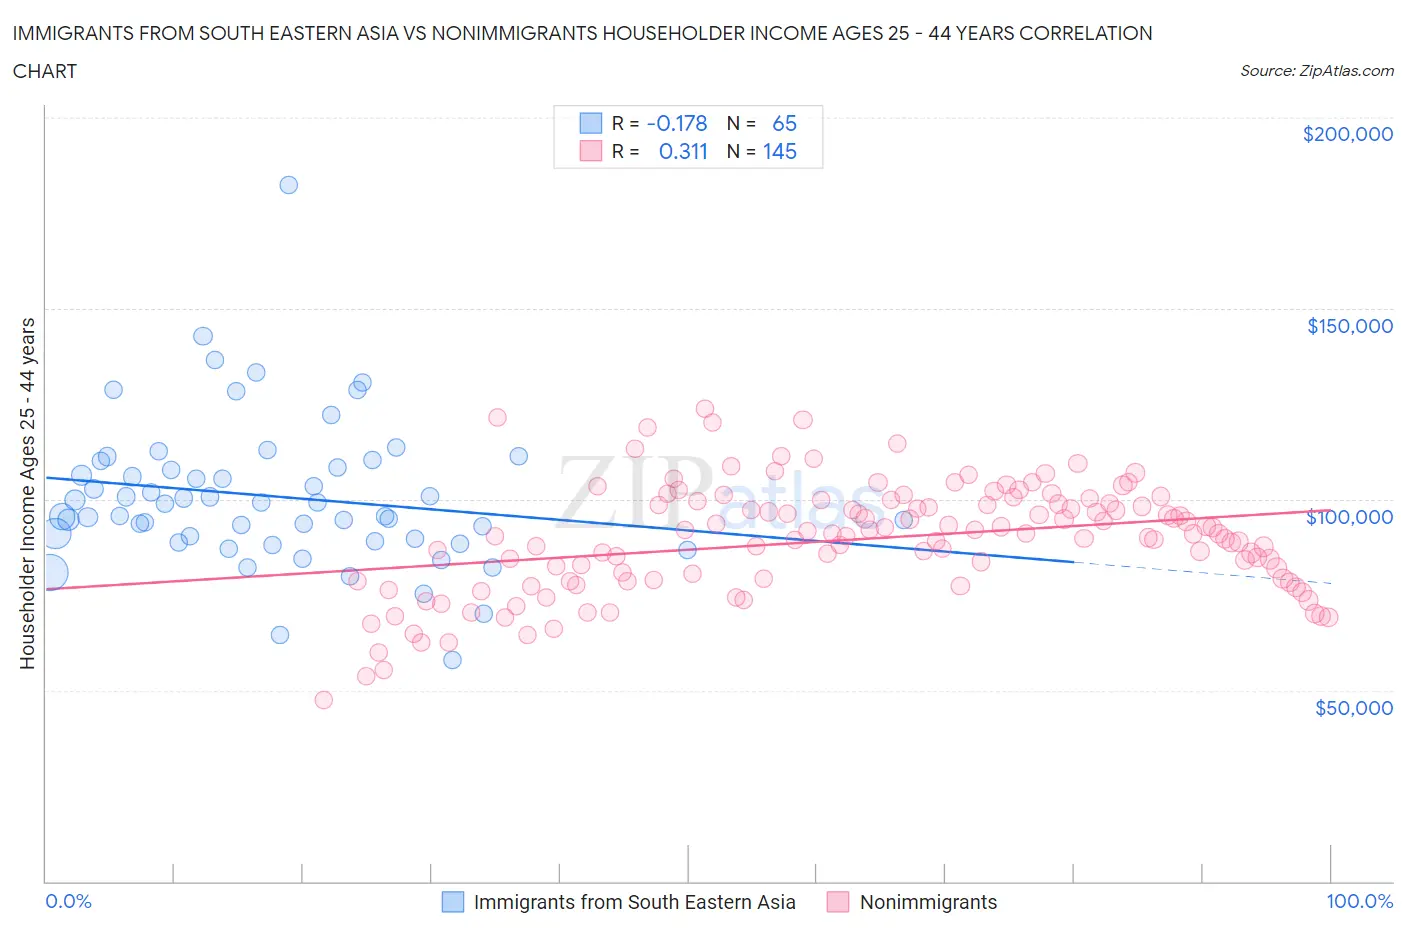 Immigrants from South Eastern Asia vs Nonimmigrants Householder Income Ages 25 - 44 years